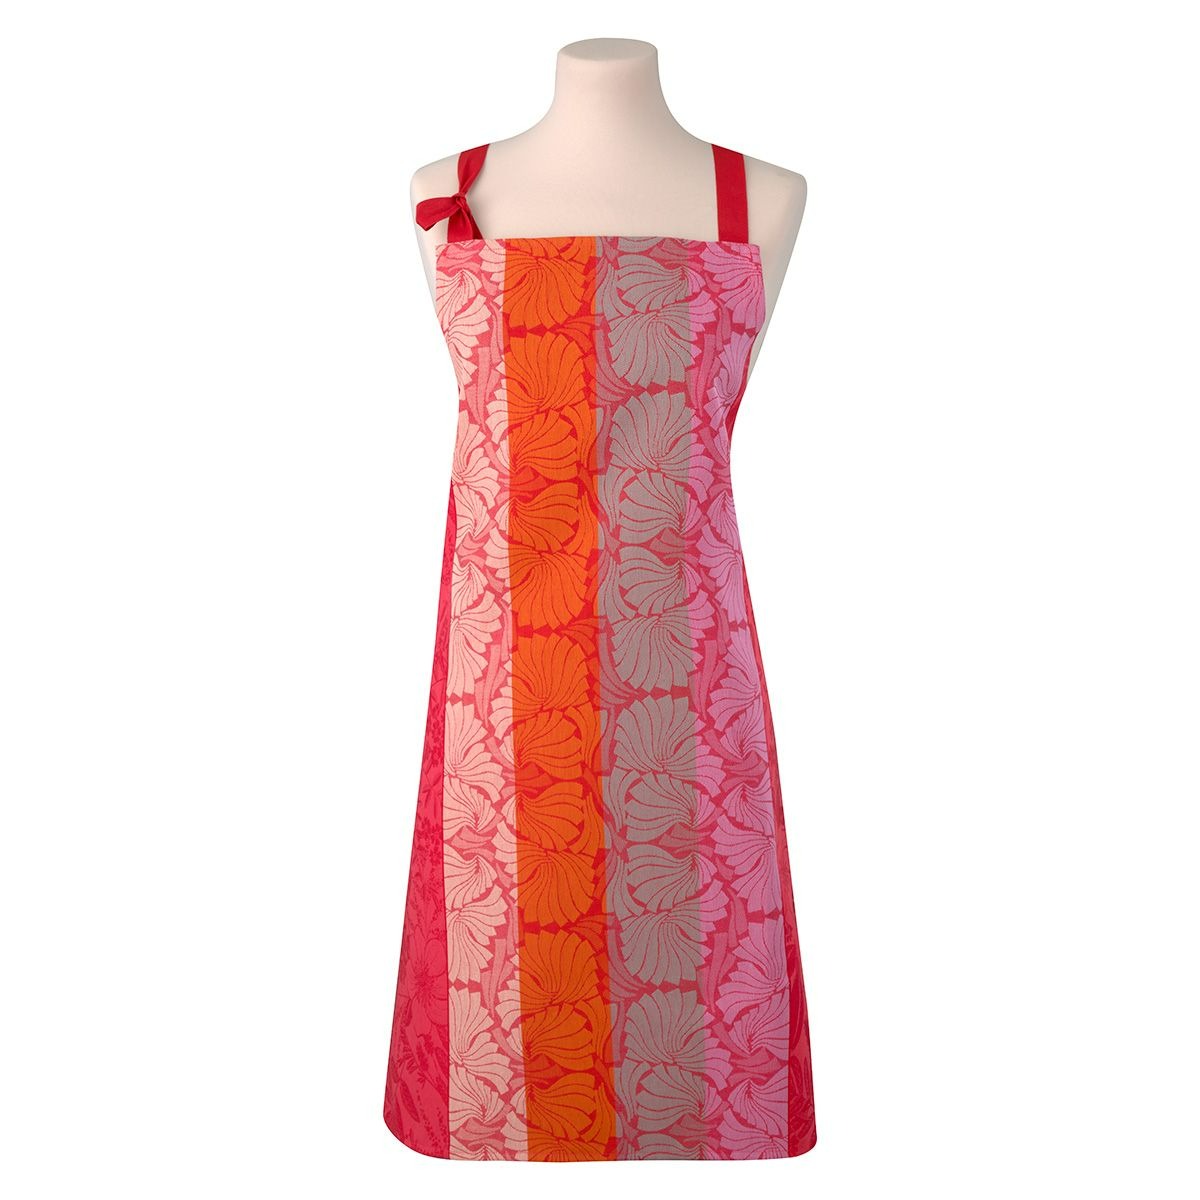 NEW! Cottage Red/Pink Apron